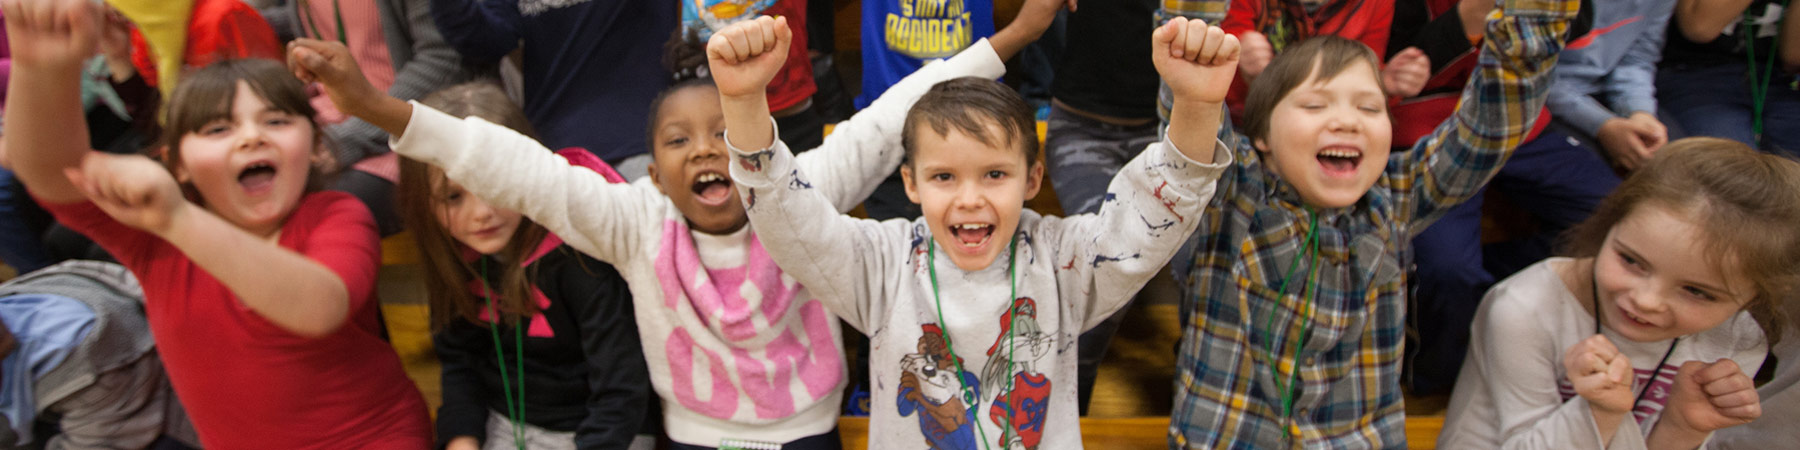 picture of several children cheering while holding their hands up in fists